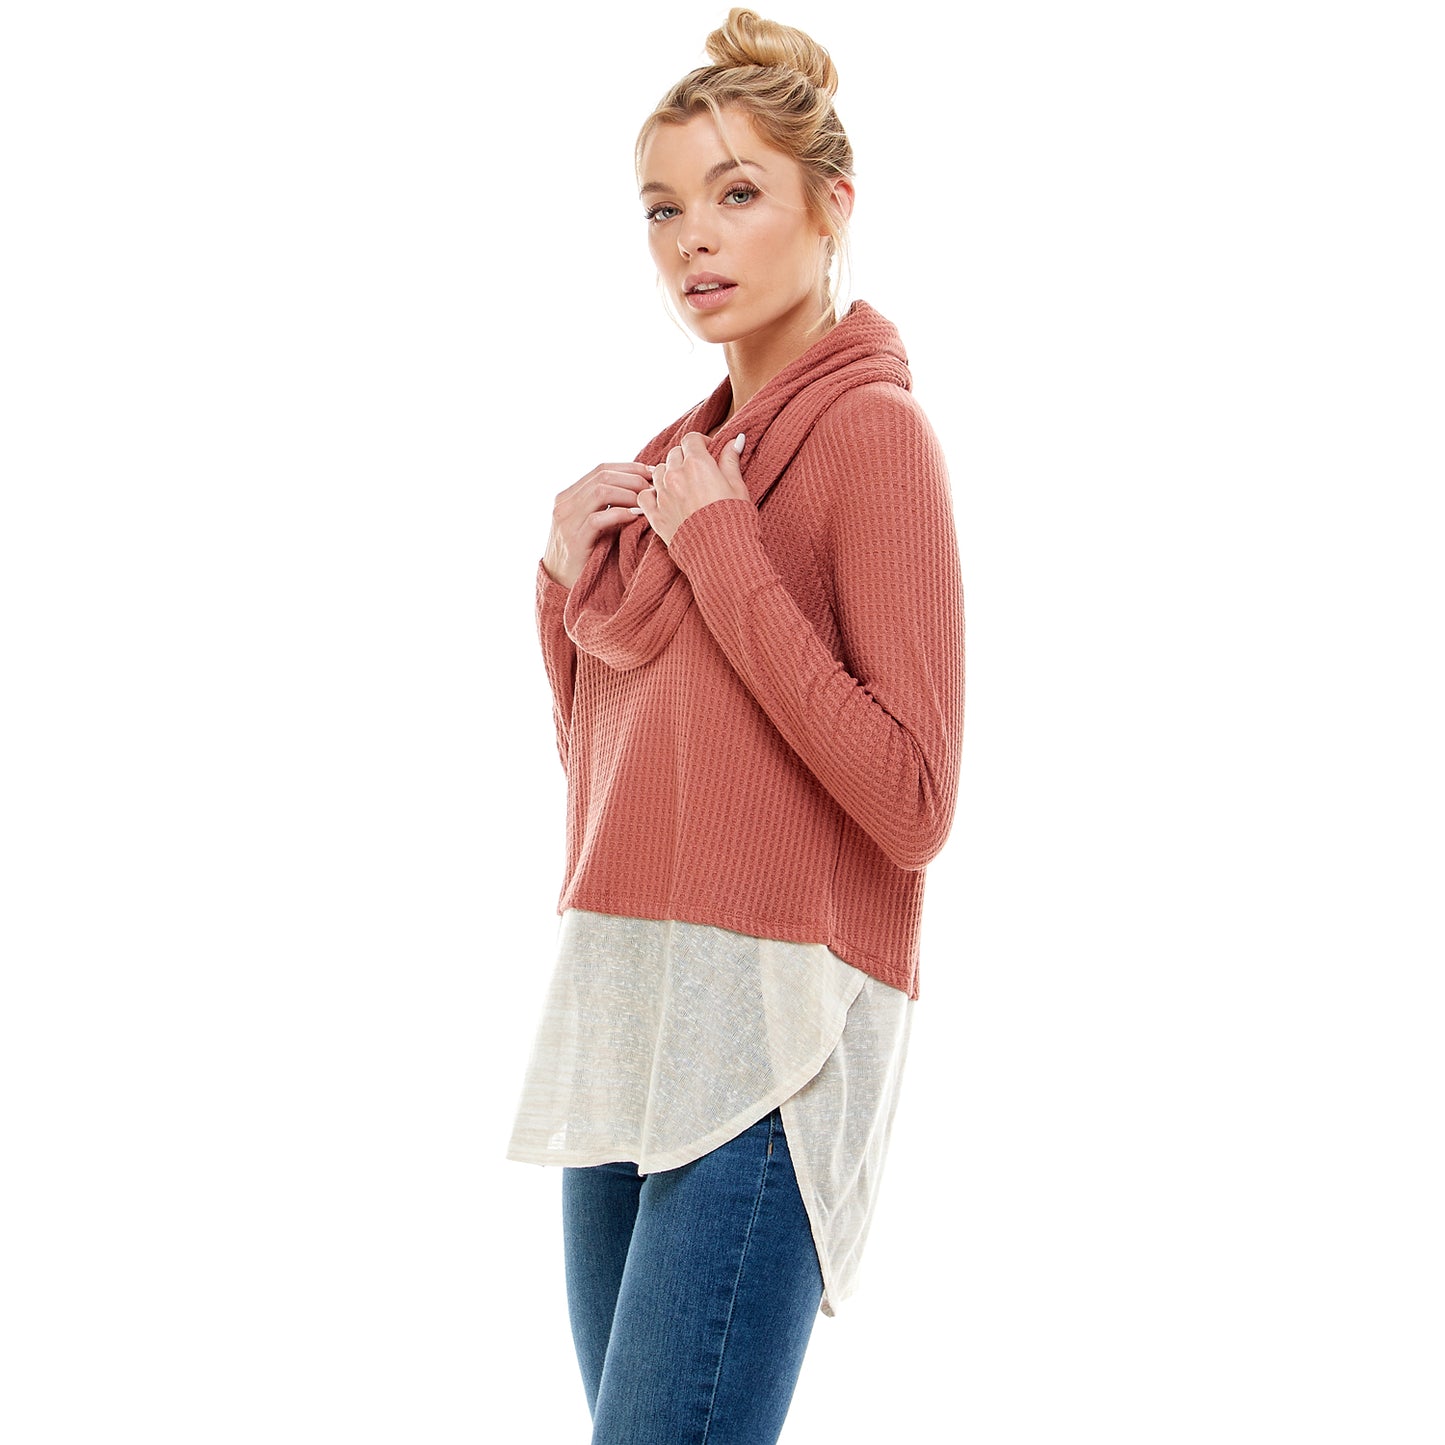 Long Sleeve Knit Top With Contrast Hem